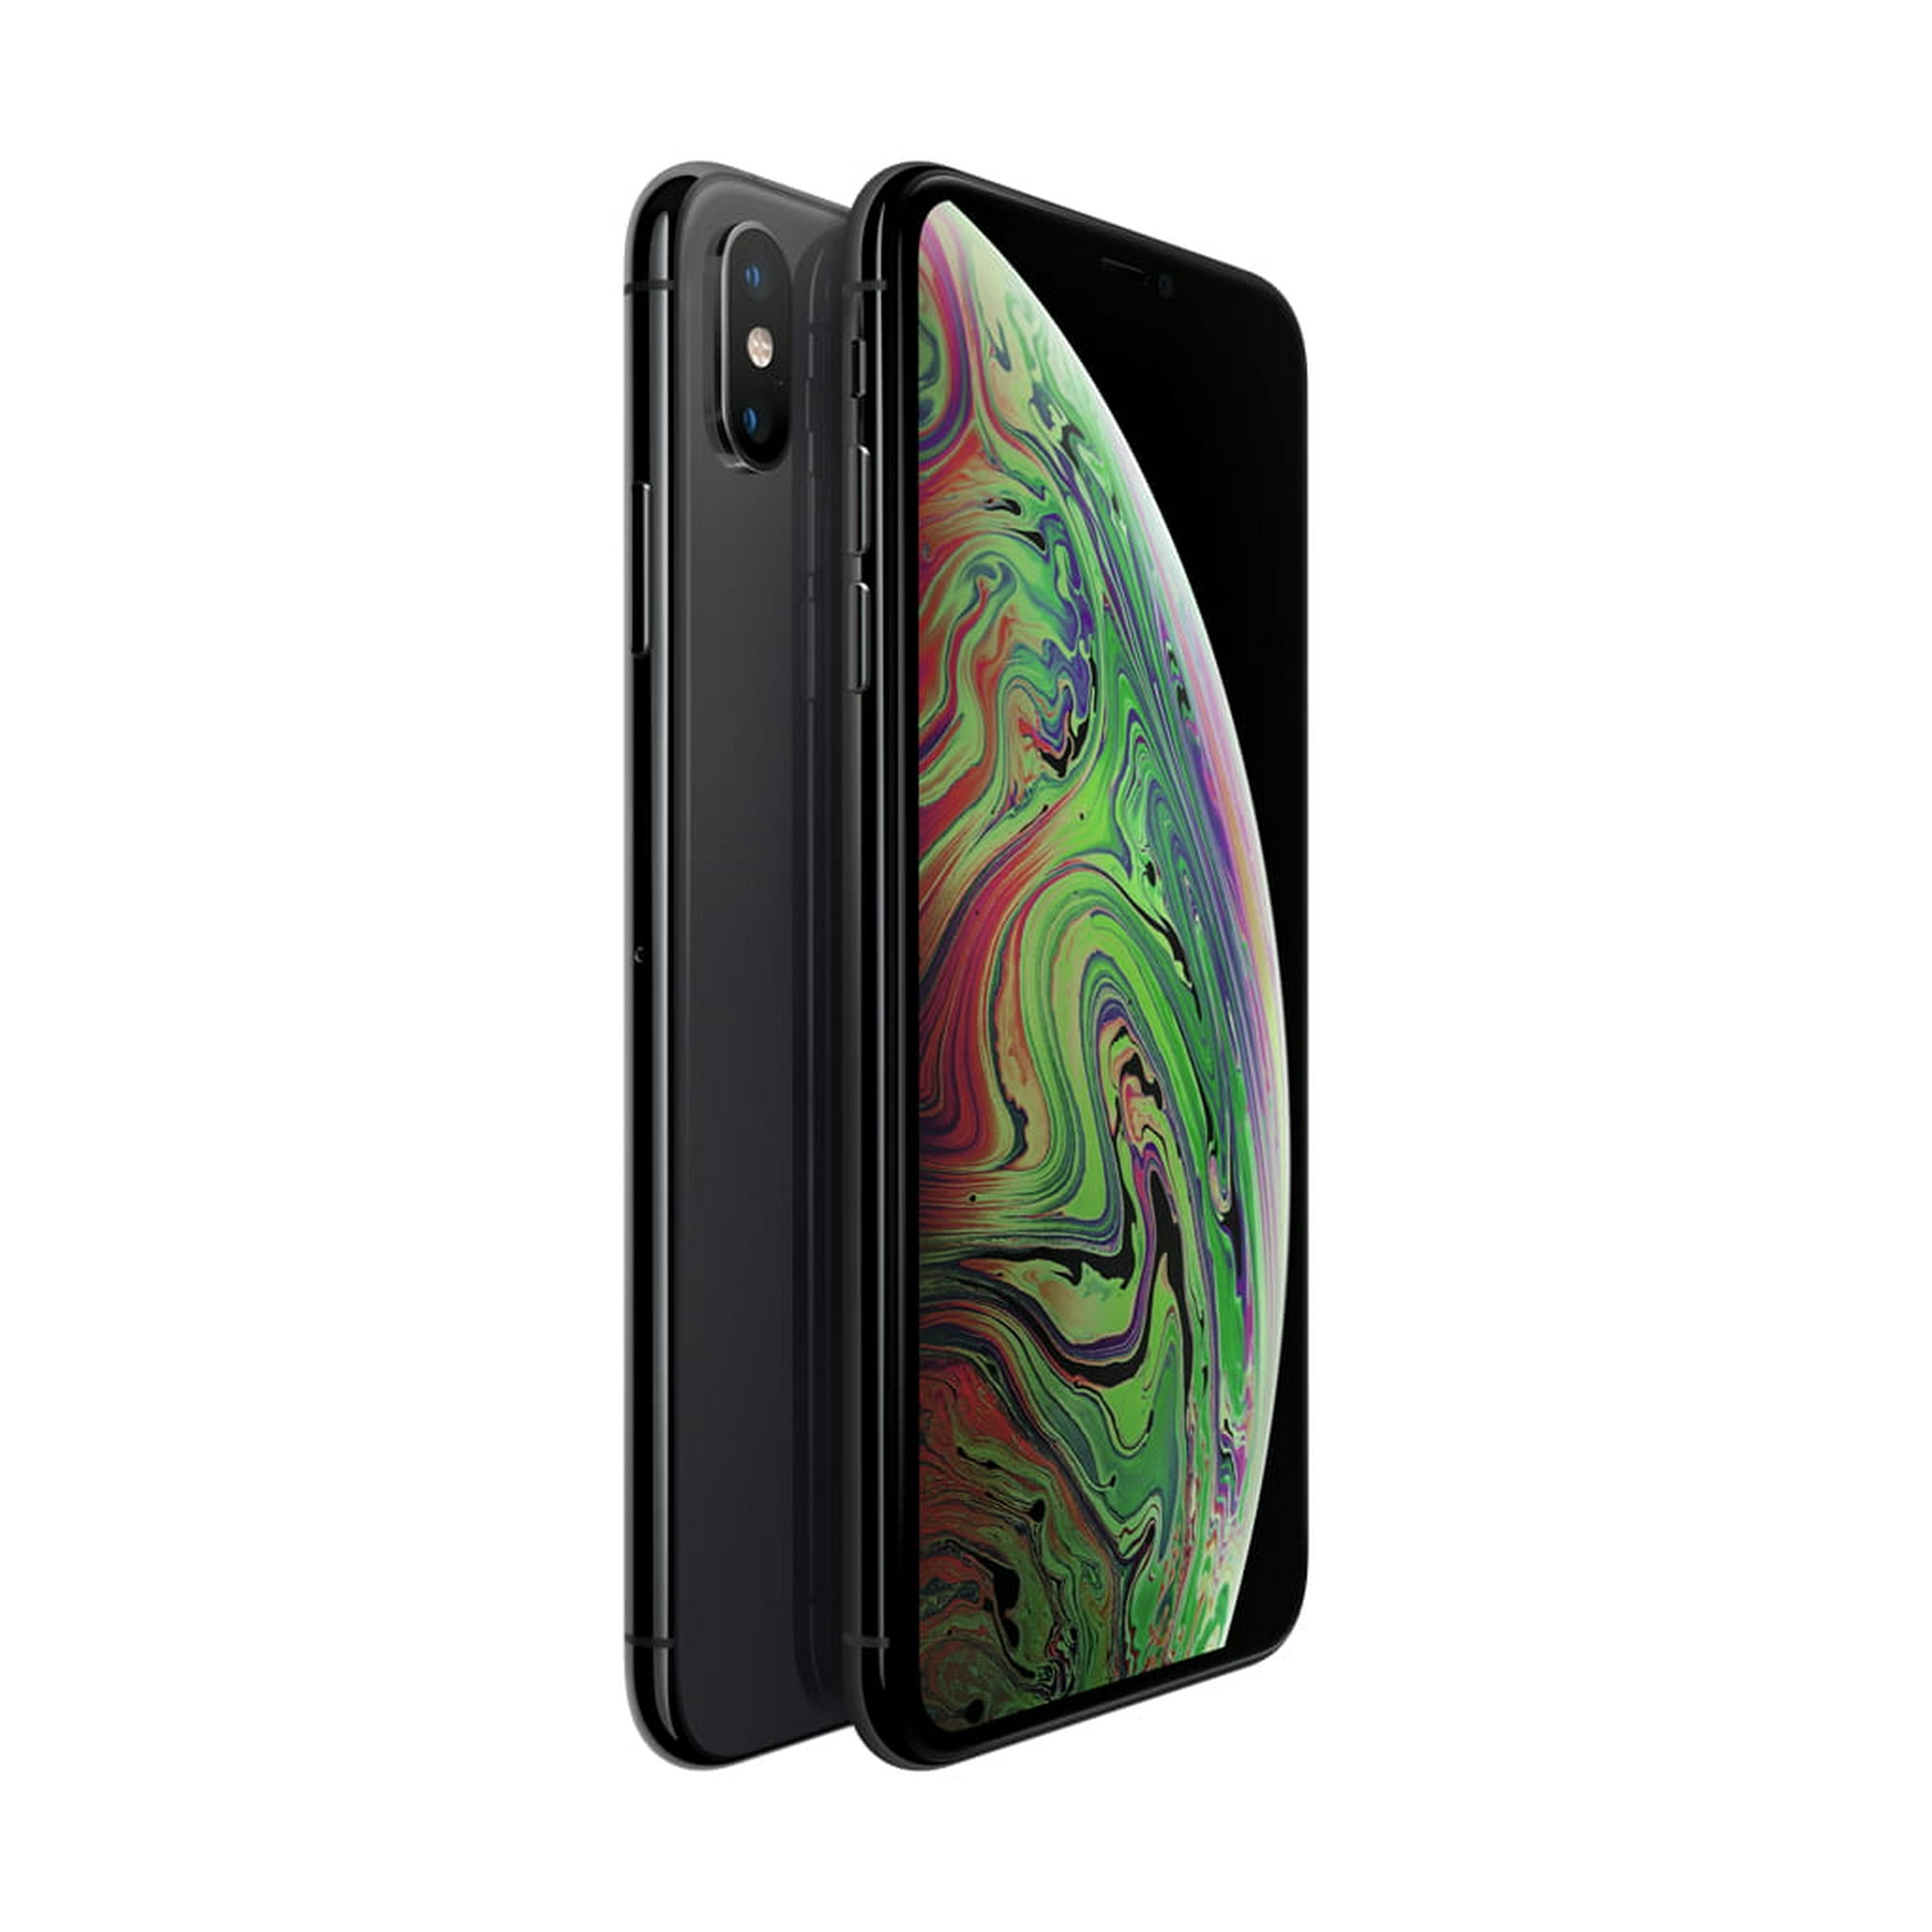 AT&T Apple iPhone XS Max 512GB, Space Gray - Upgrade Only ...